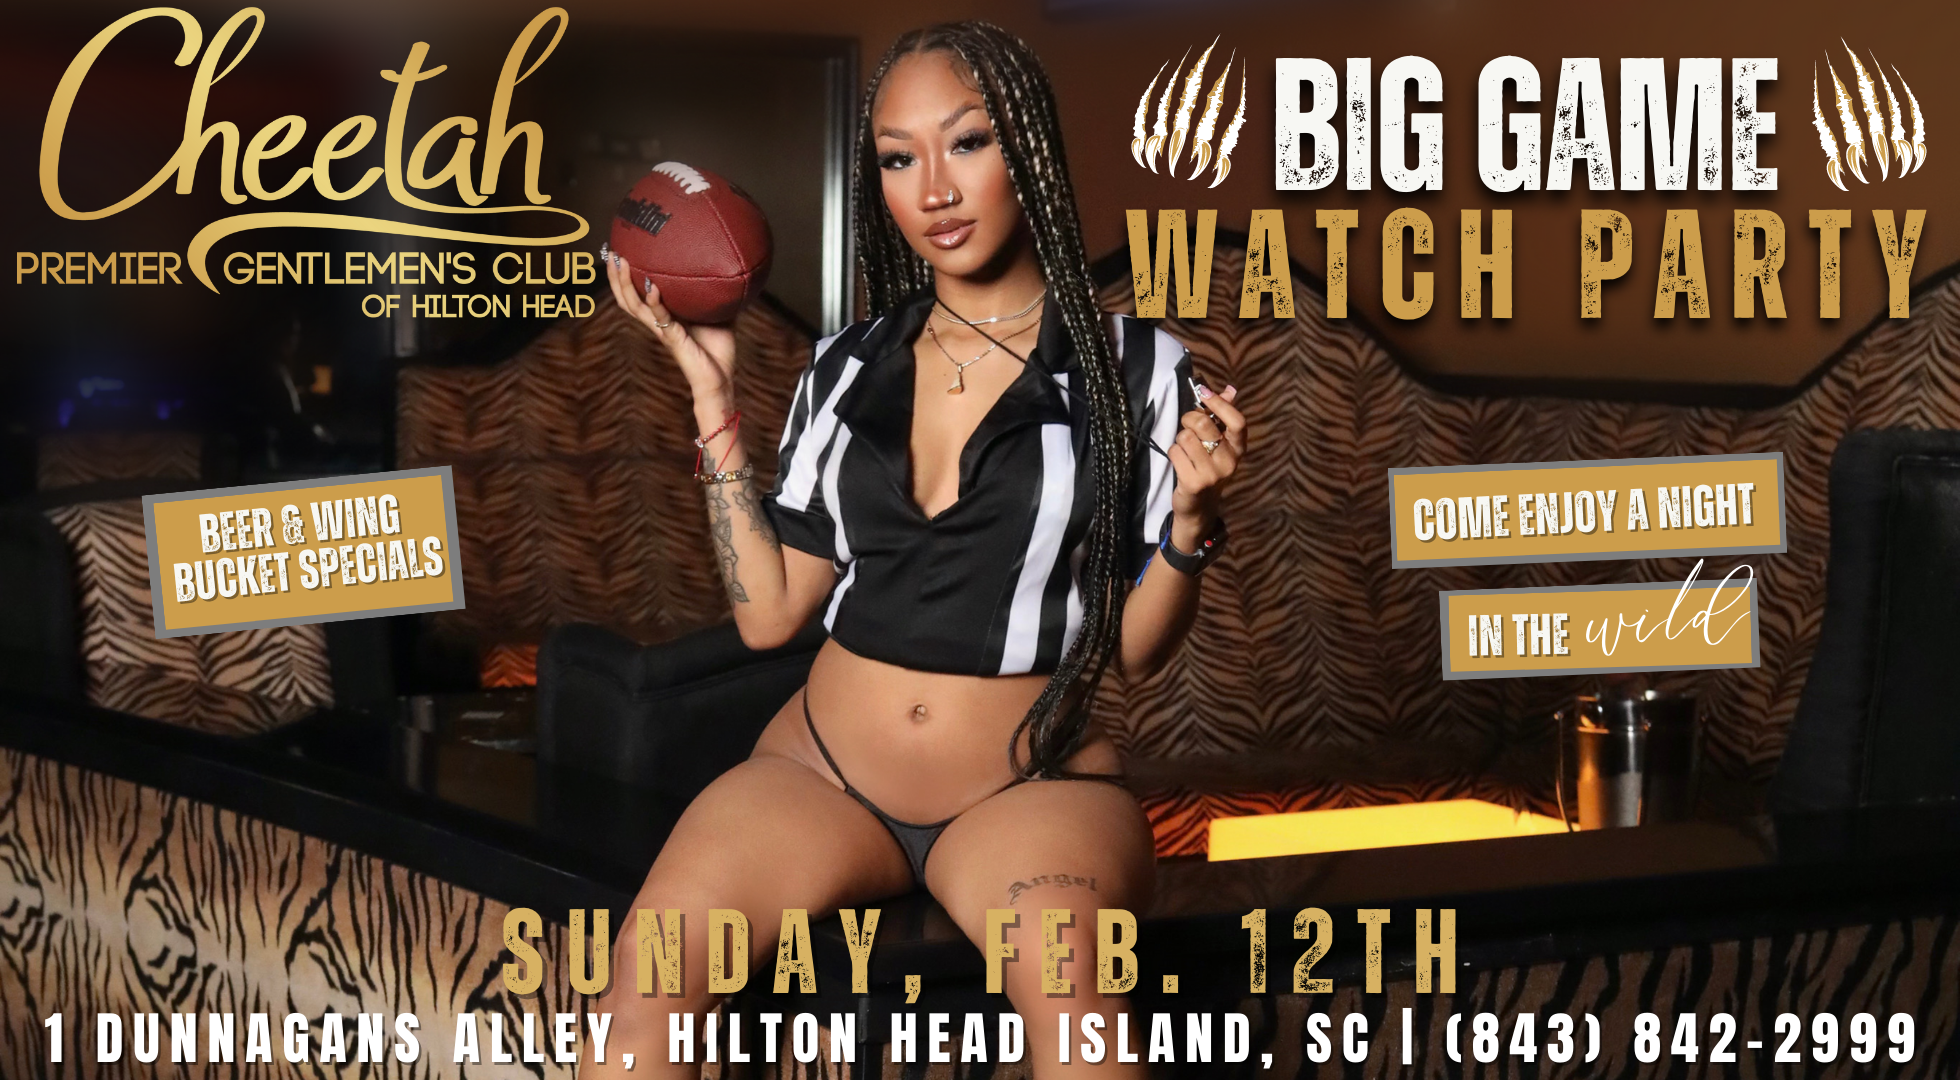 Big Game Watch Party